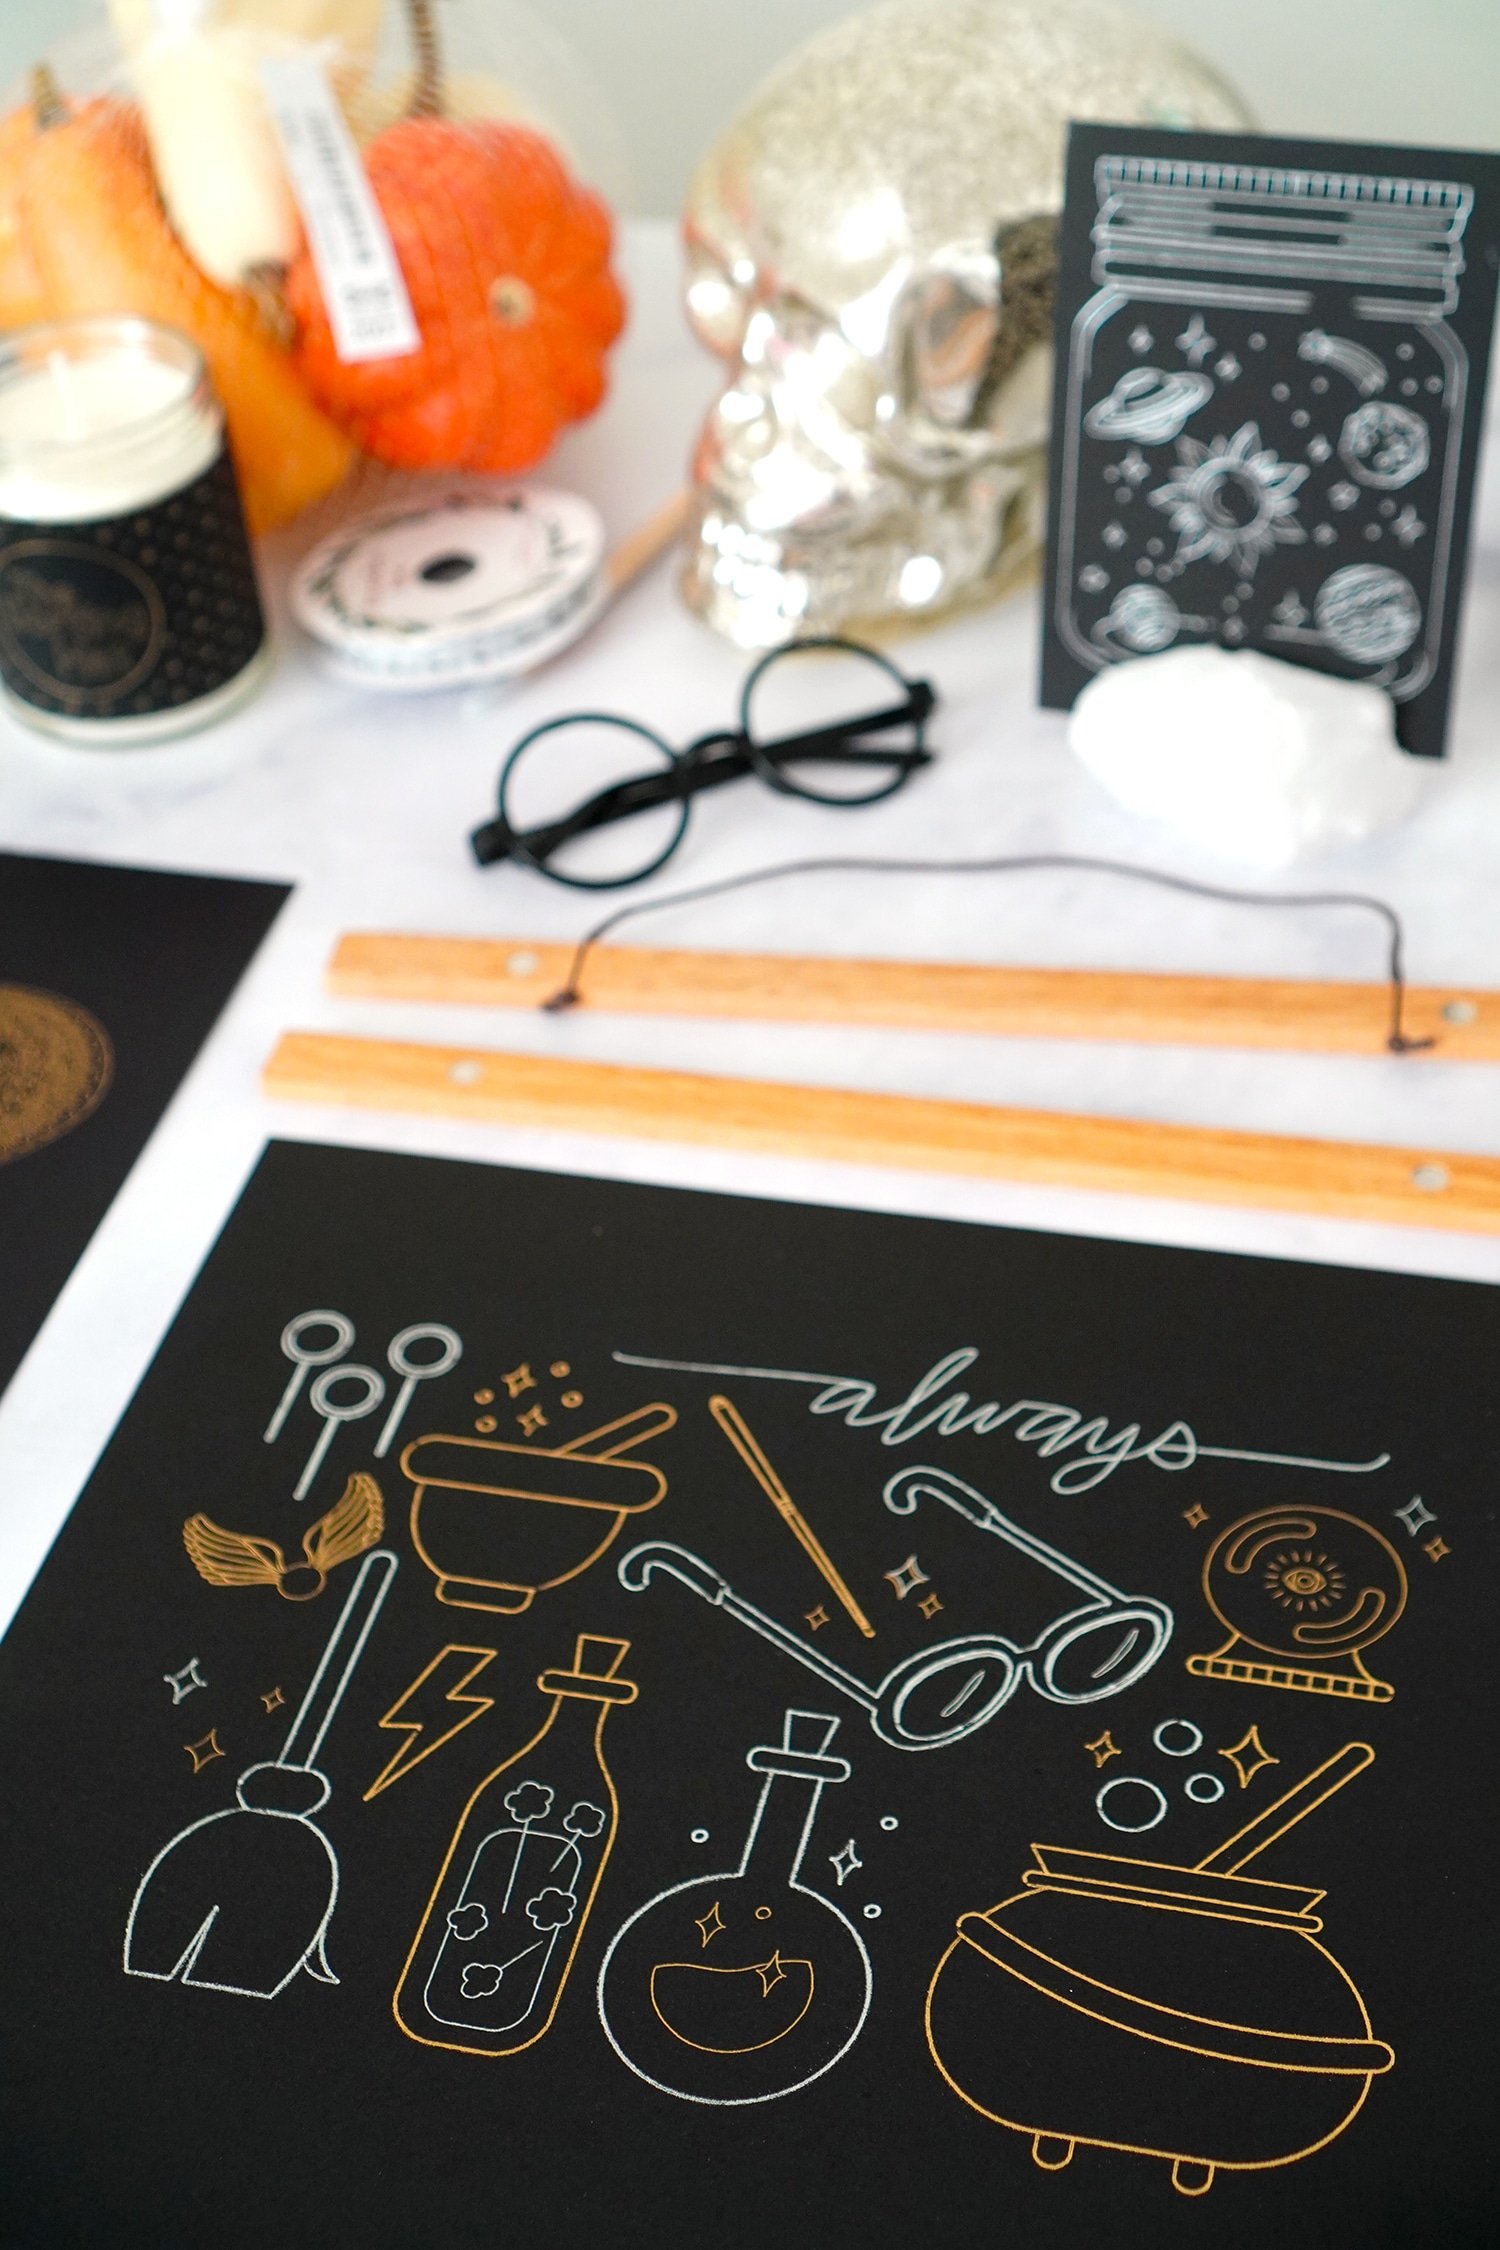 Harry Potter inspired gold and silver foil artwork on table with picture hangers and Halloween props